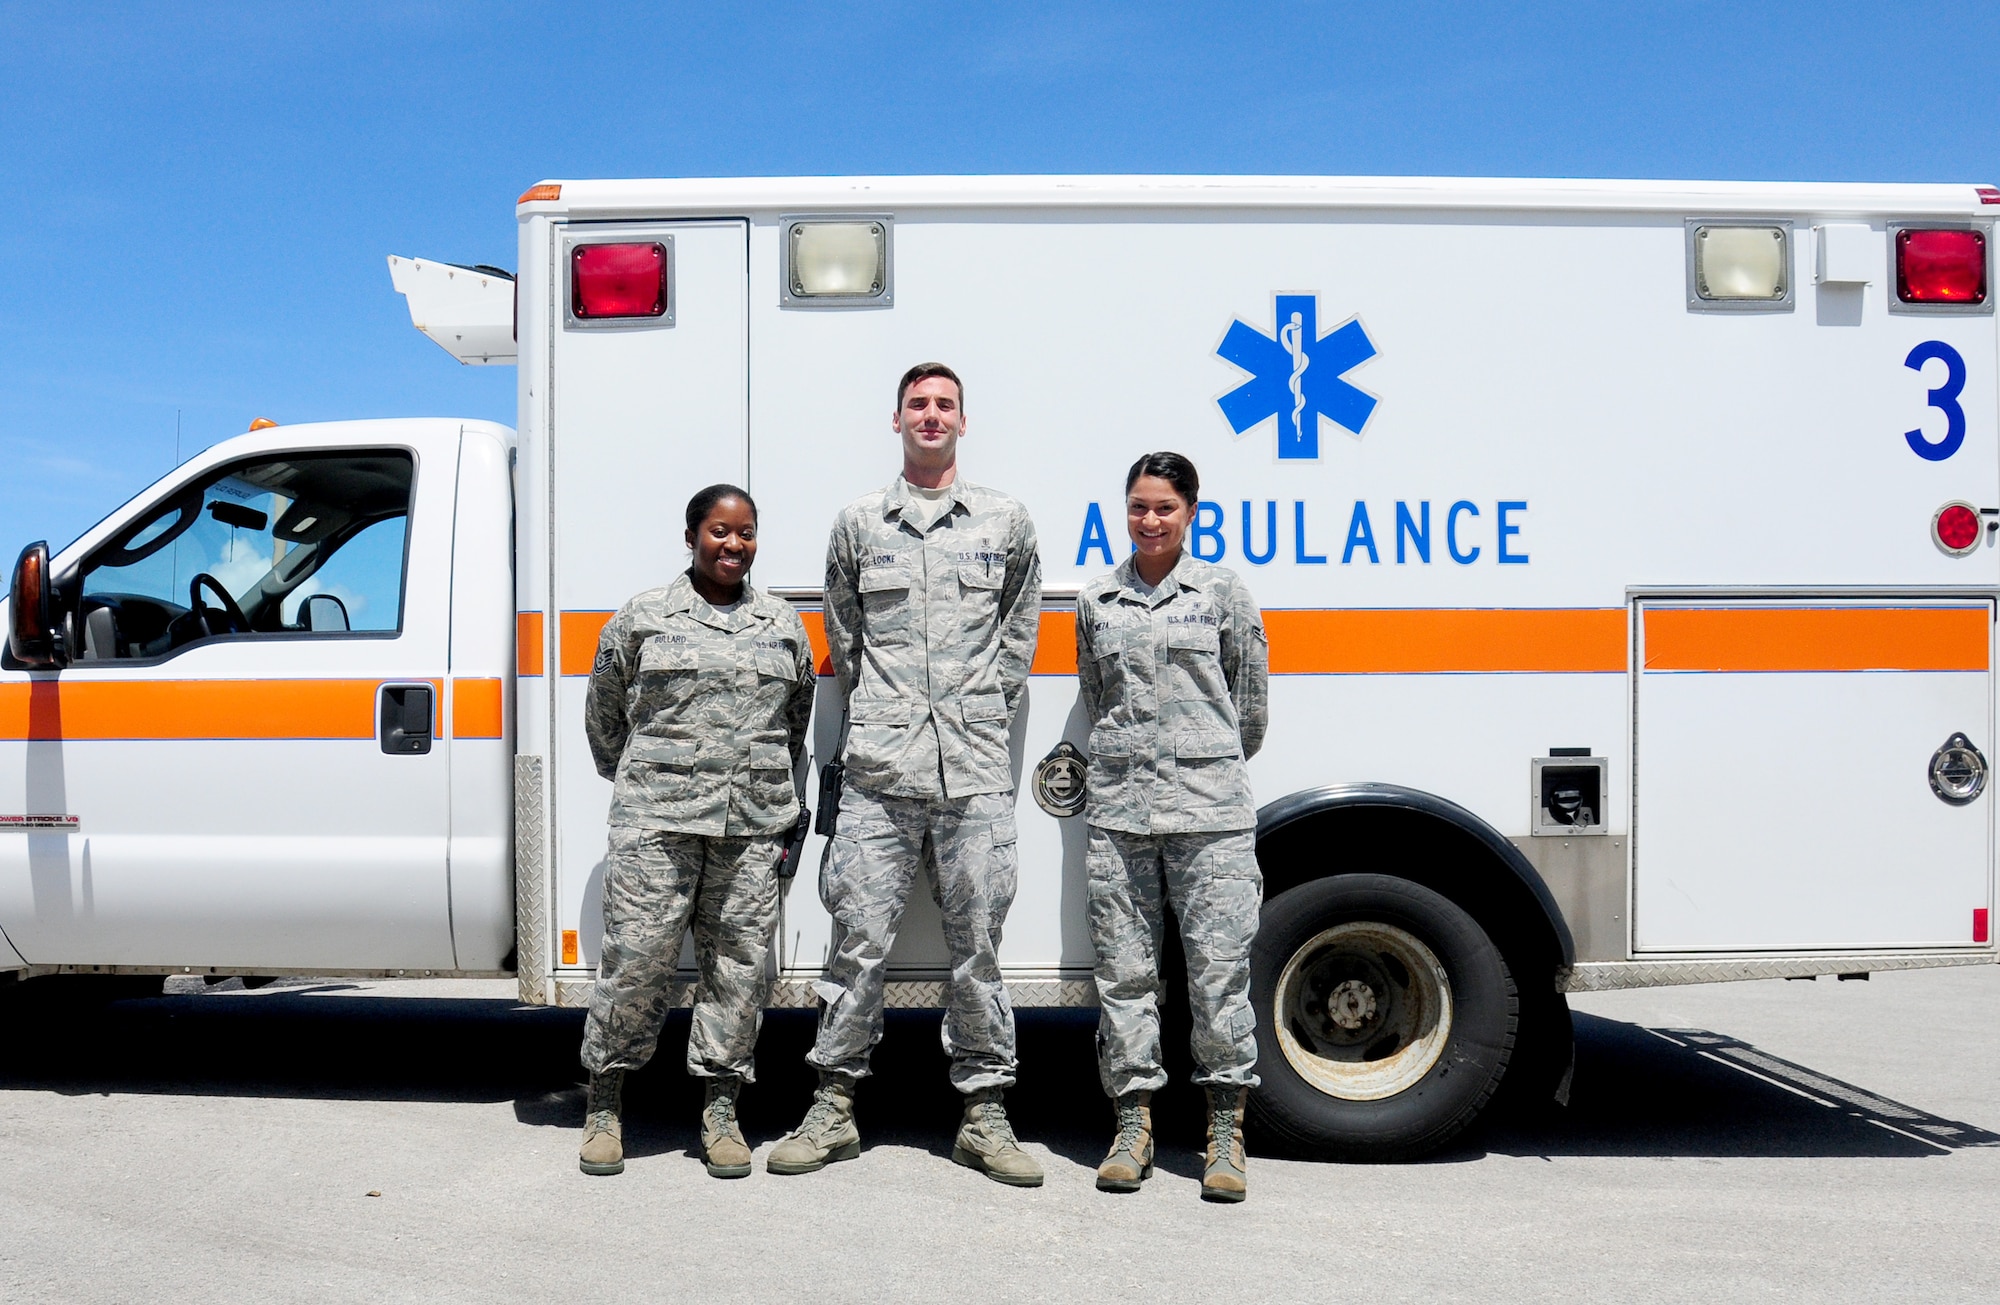 ANDERSEN AIR FORCE BASE, Guam-Emergency response Airmen from the 36th Medical Group stand in front of an ambulance in recognition of the recent ambulatory services upgrades May 7. The new services upgrades include the ability for the Airmen to use new pharmaceuticals in route to the hospital as well as administer electrocardiograms. (U.S Air Force photo by Senior Airman Jeffrey Schultze)  